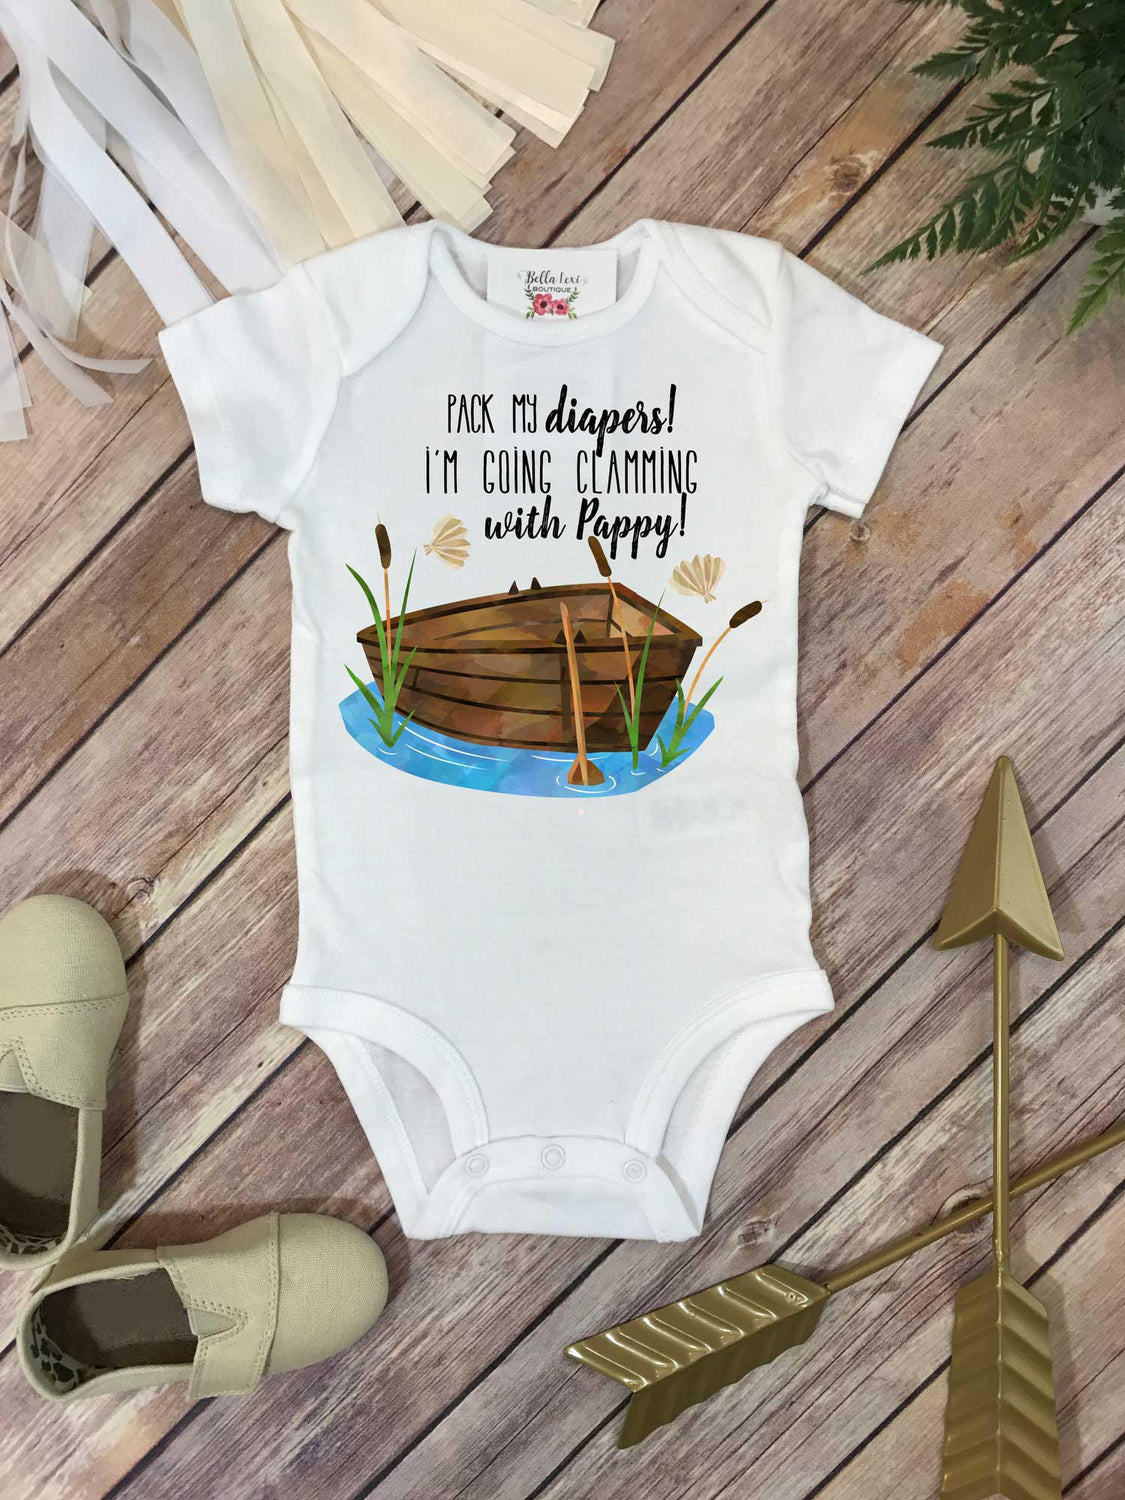 Clamming Shirt, Pack My Diapers I'm Going Clamming with Pappy, Baby Shower Gift, Fishing Baby Shirt, Fishing Buddy 12M L/S Bodysuit by